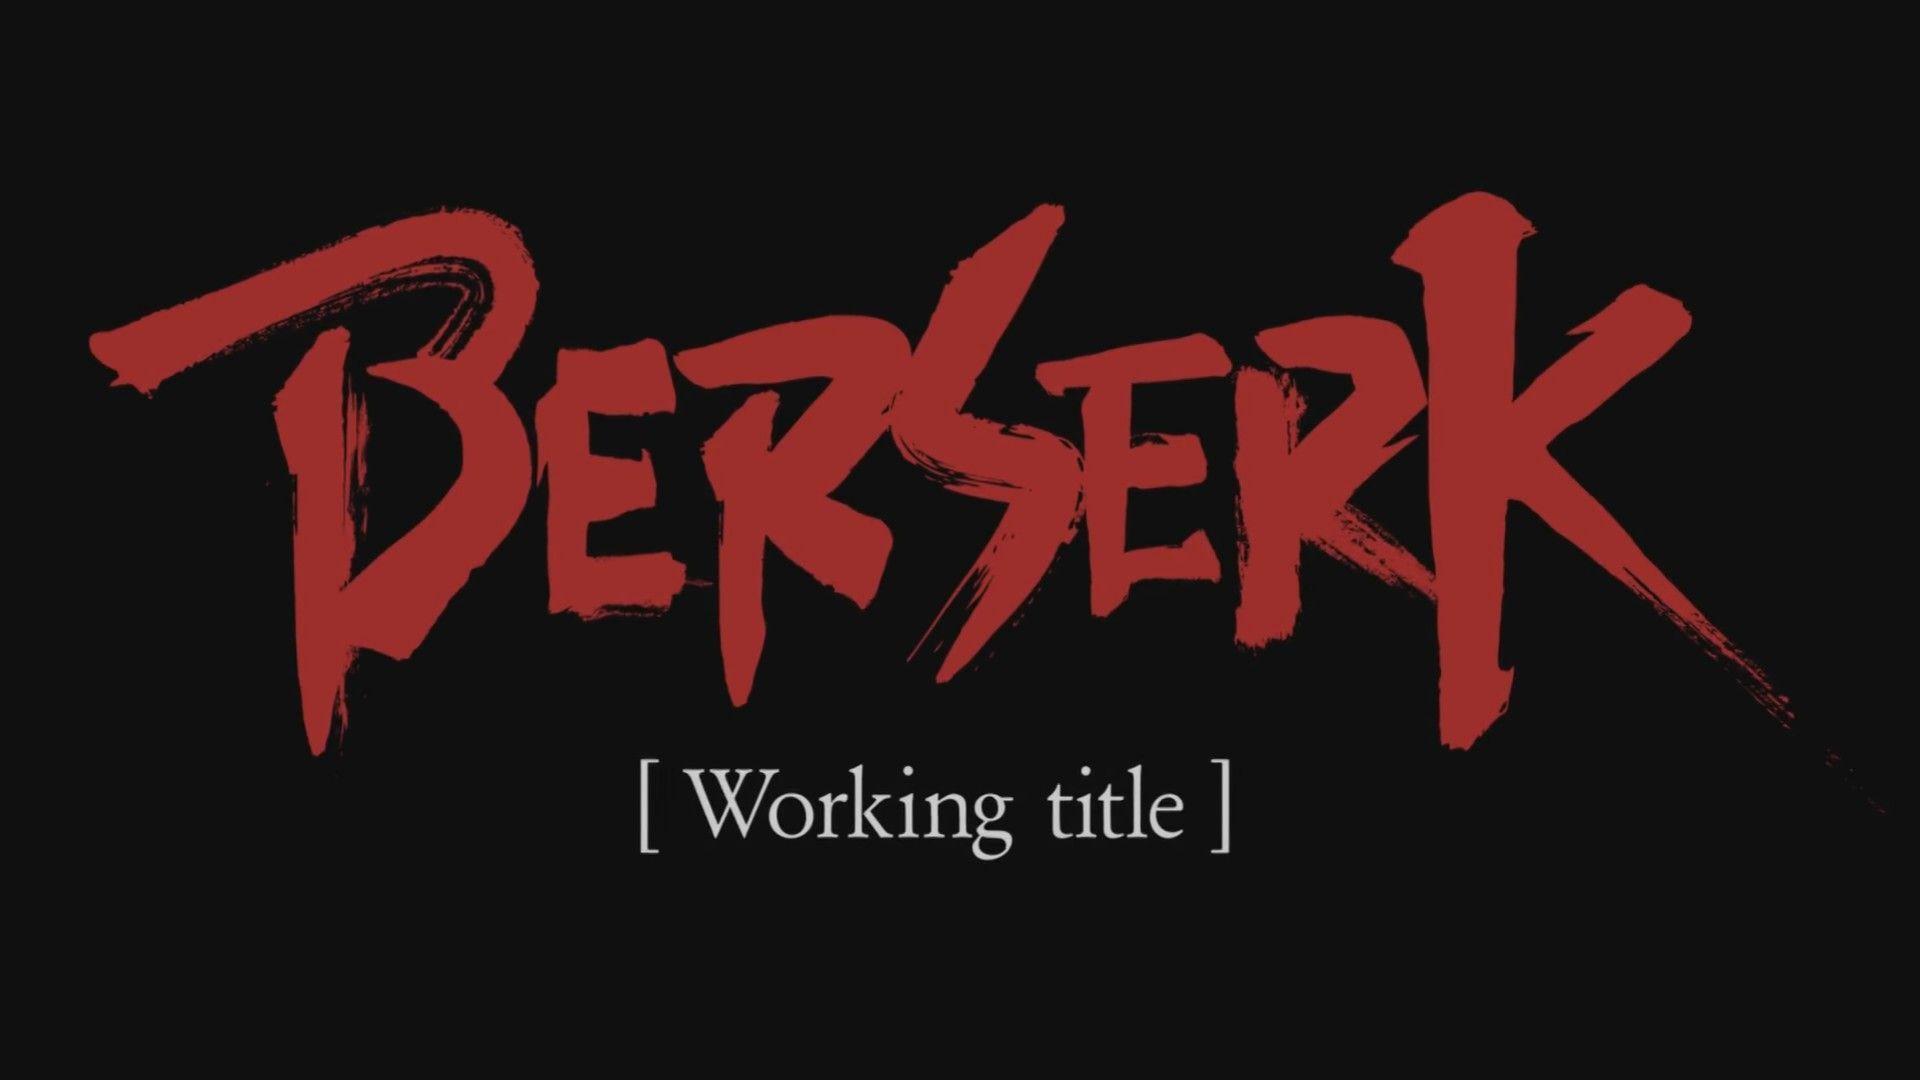 Berserk for PS PS3 and PS Vita Gets First Image and Japanese